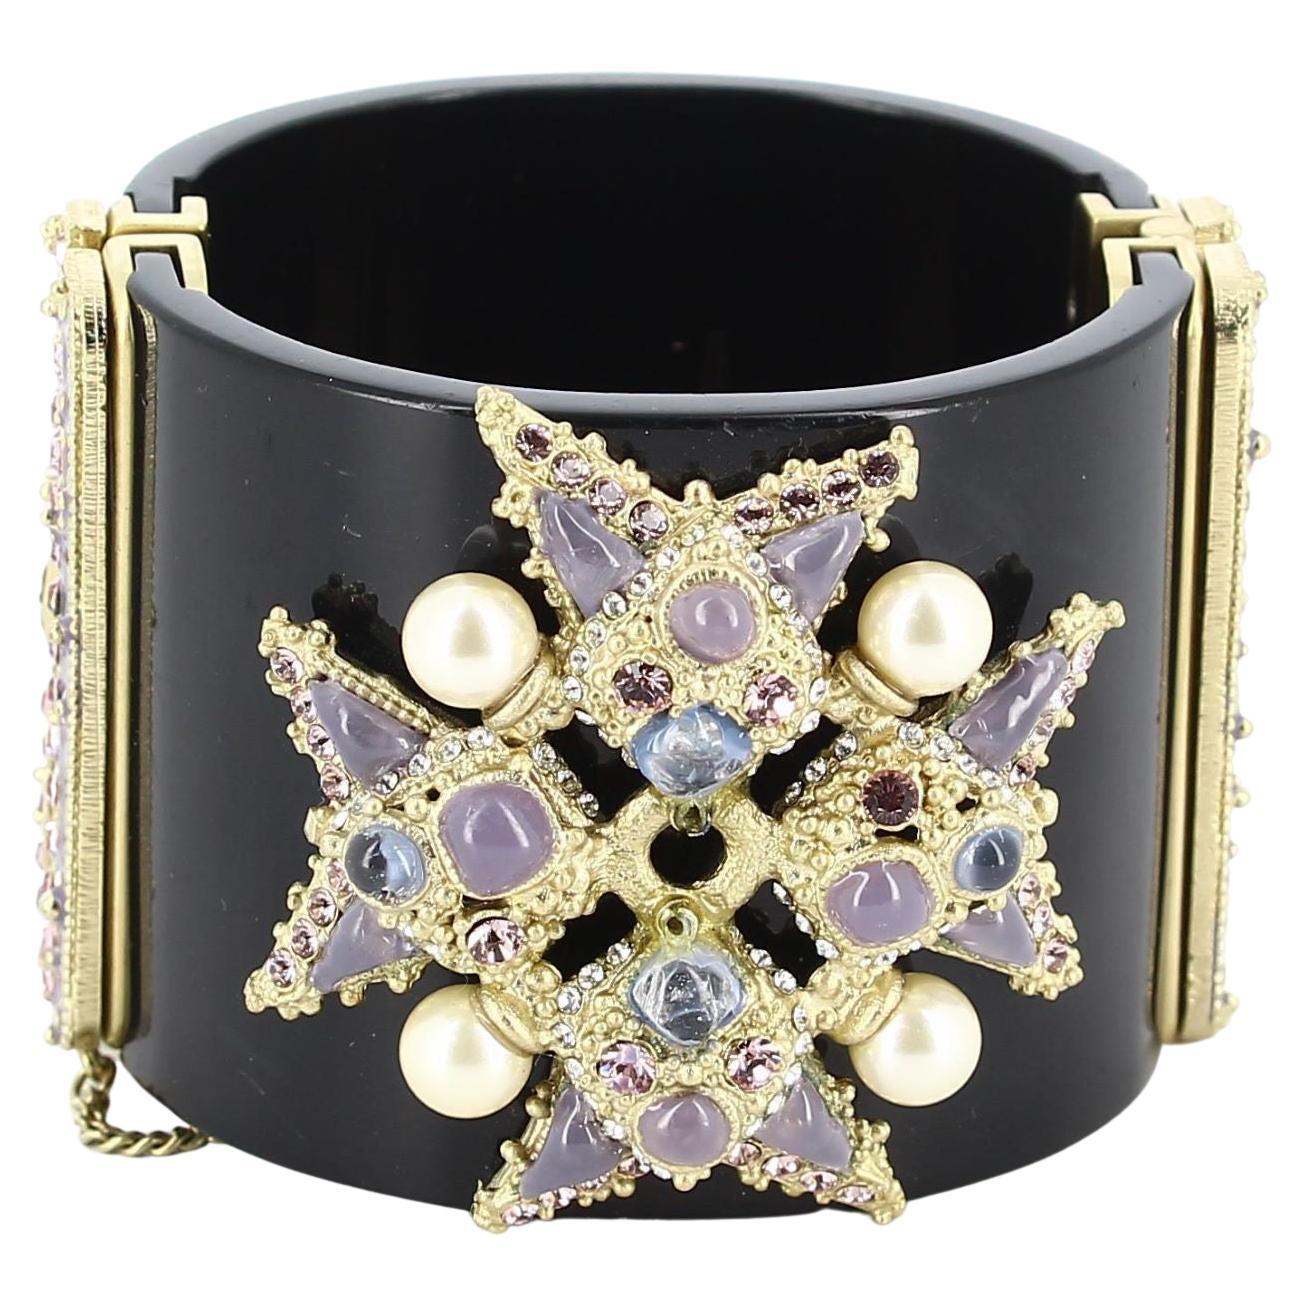 Chanel Black Cuff Bracelet with Pearls